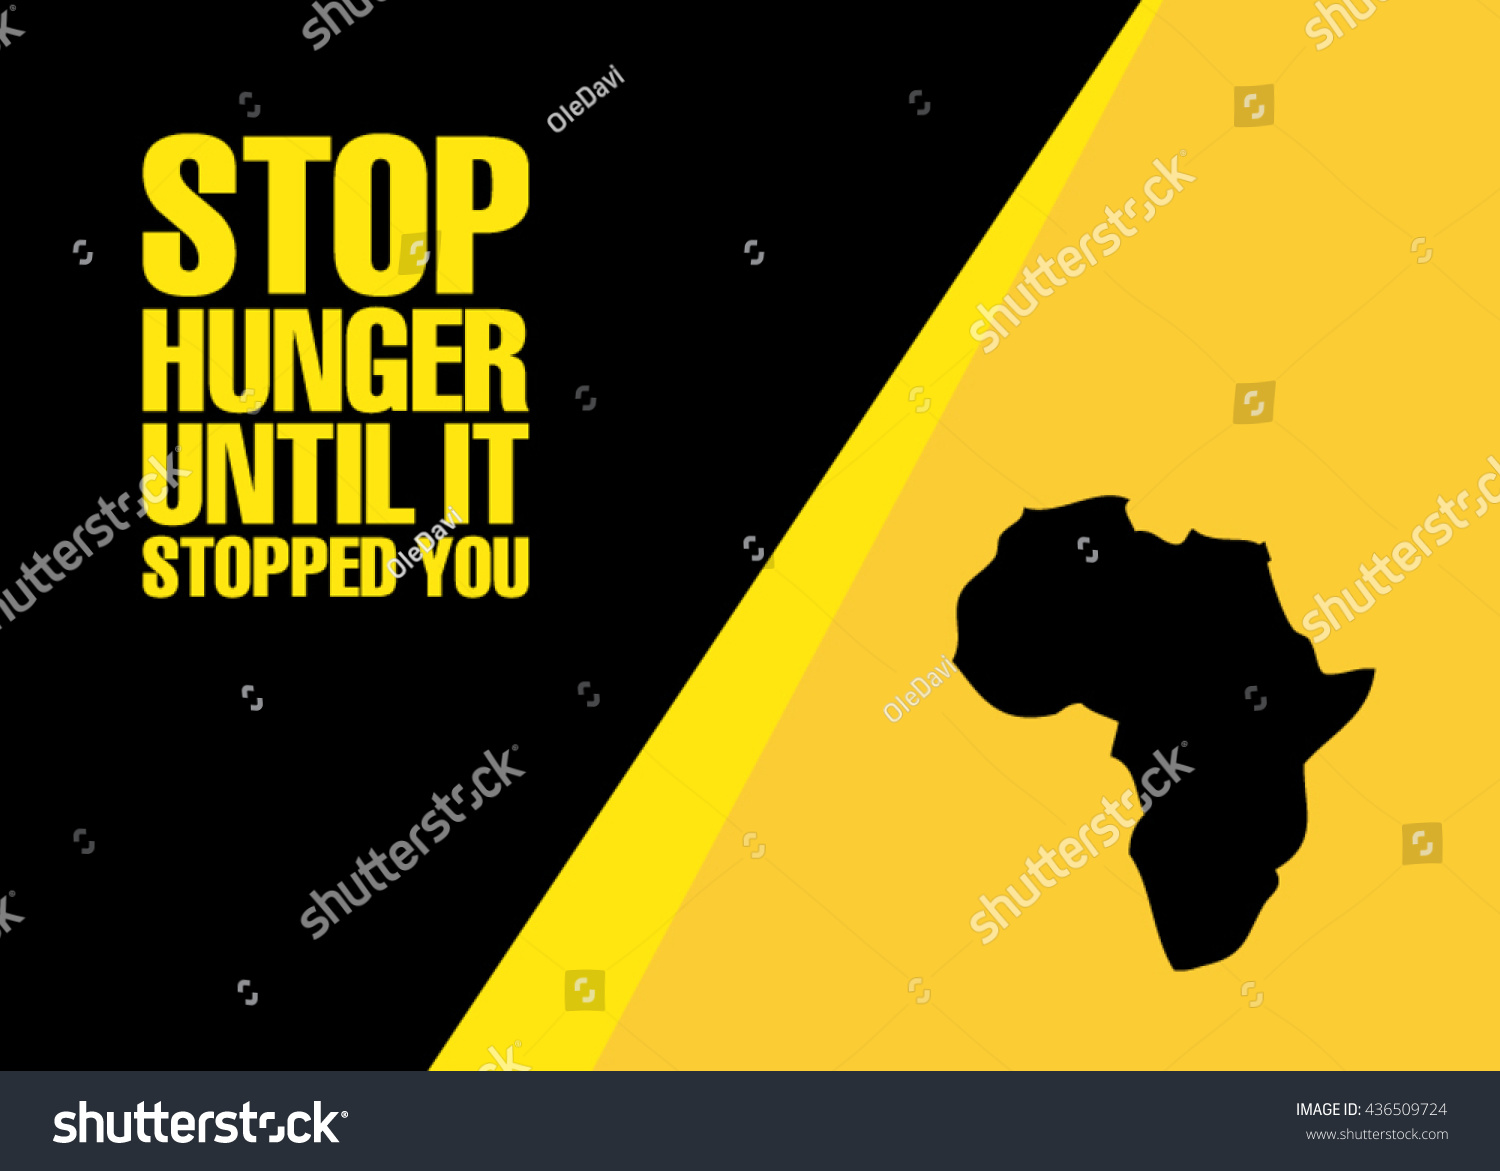 help stop hunger